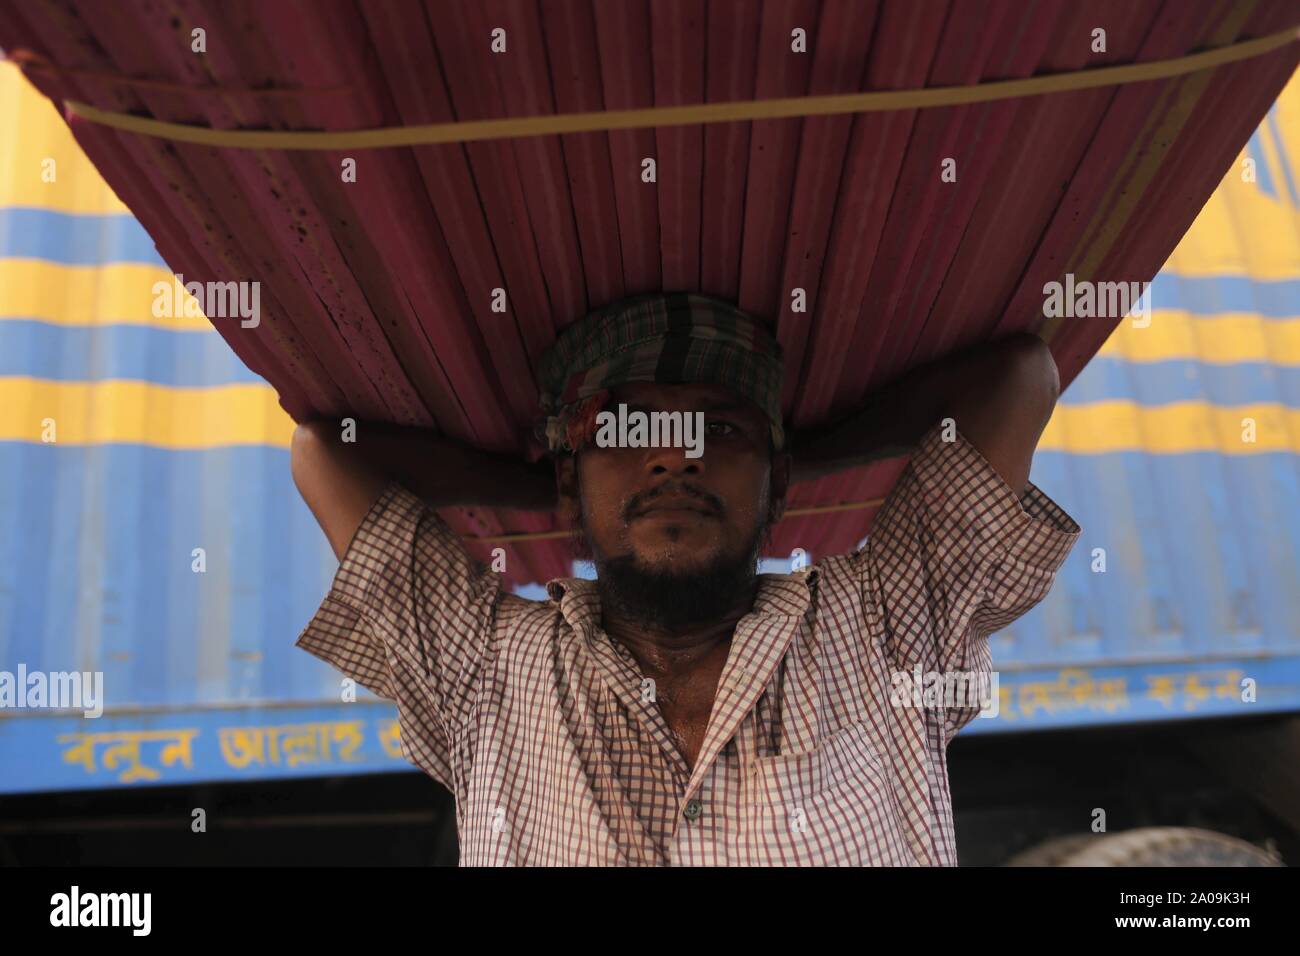 Dhaka, Bangladesh. 20th Sep, 2019. A labor delivers foam boards on his head near Wiseghat, countries biggest wholesale market in the bank of the Buriganga River. Credit: MD Mehedi Hasan/ZUMA Wire/Alamy Live News Stock Photo